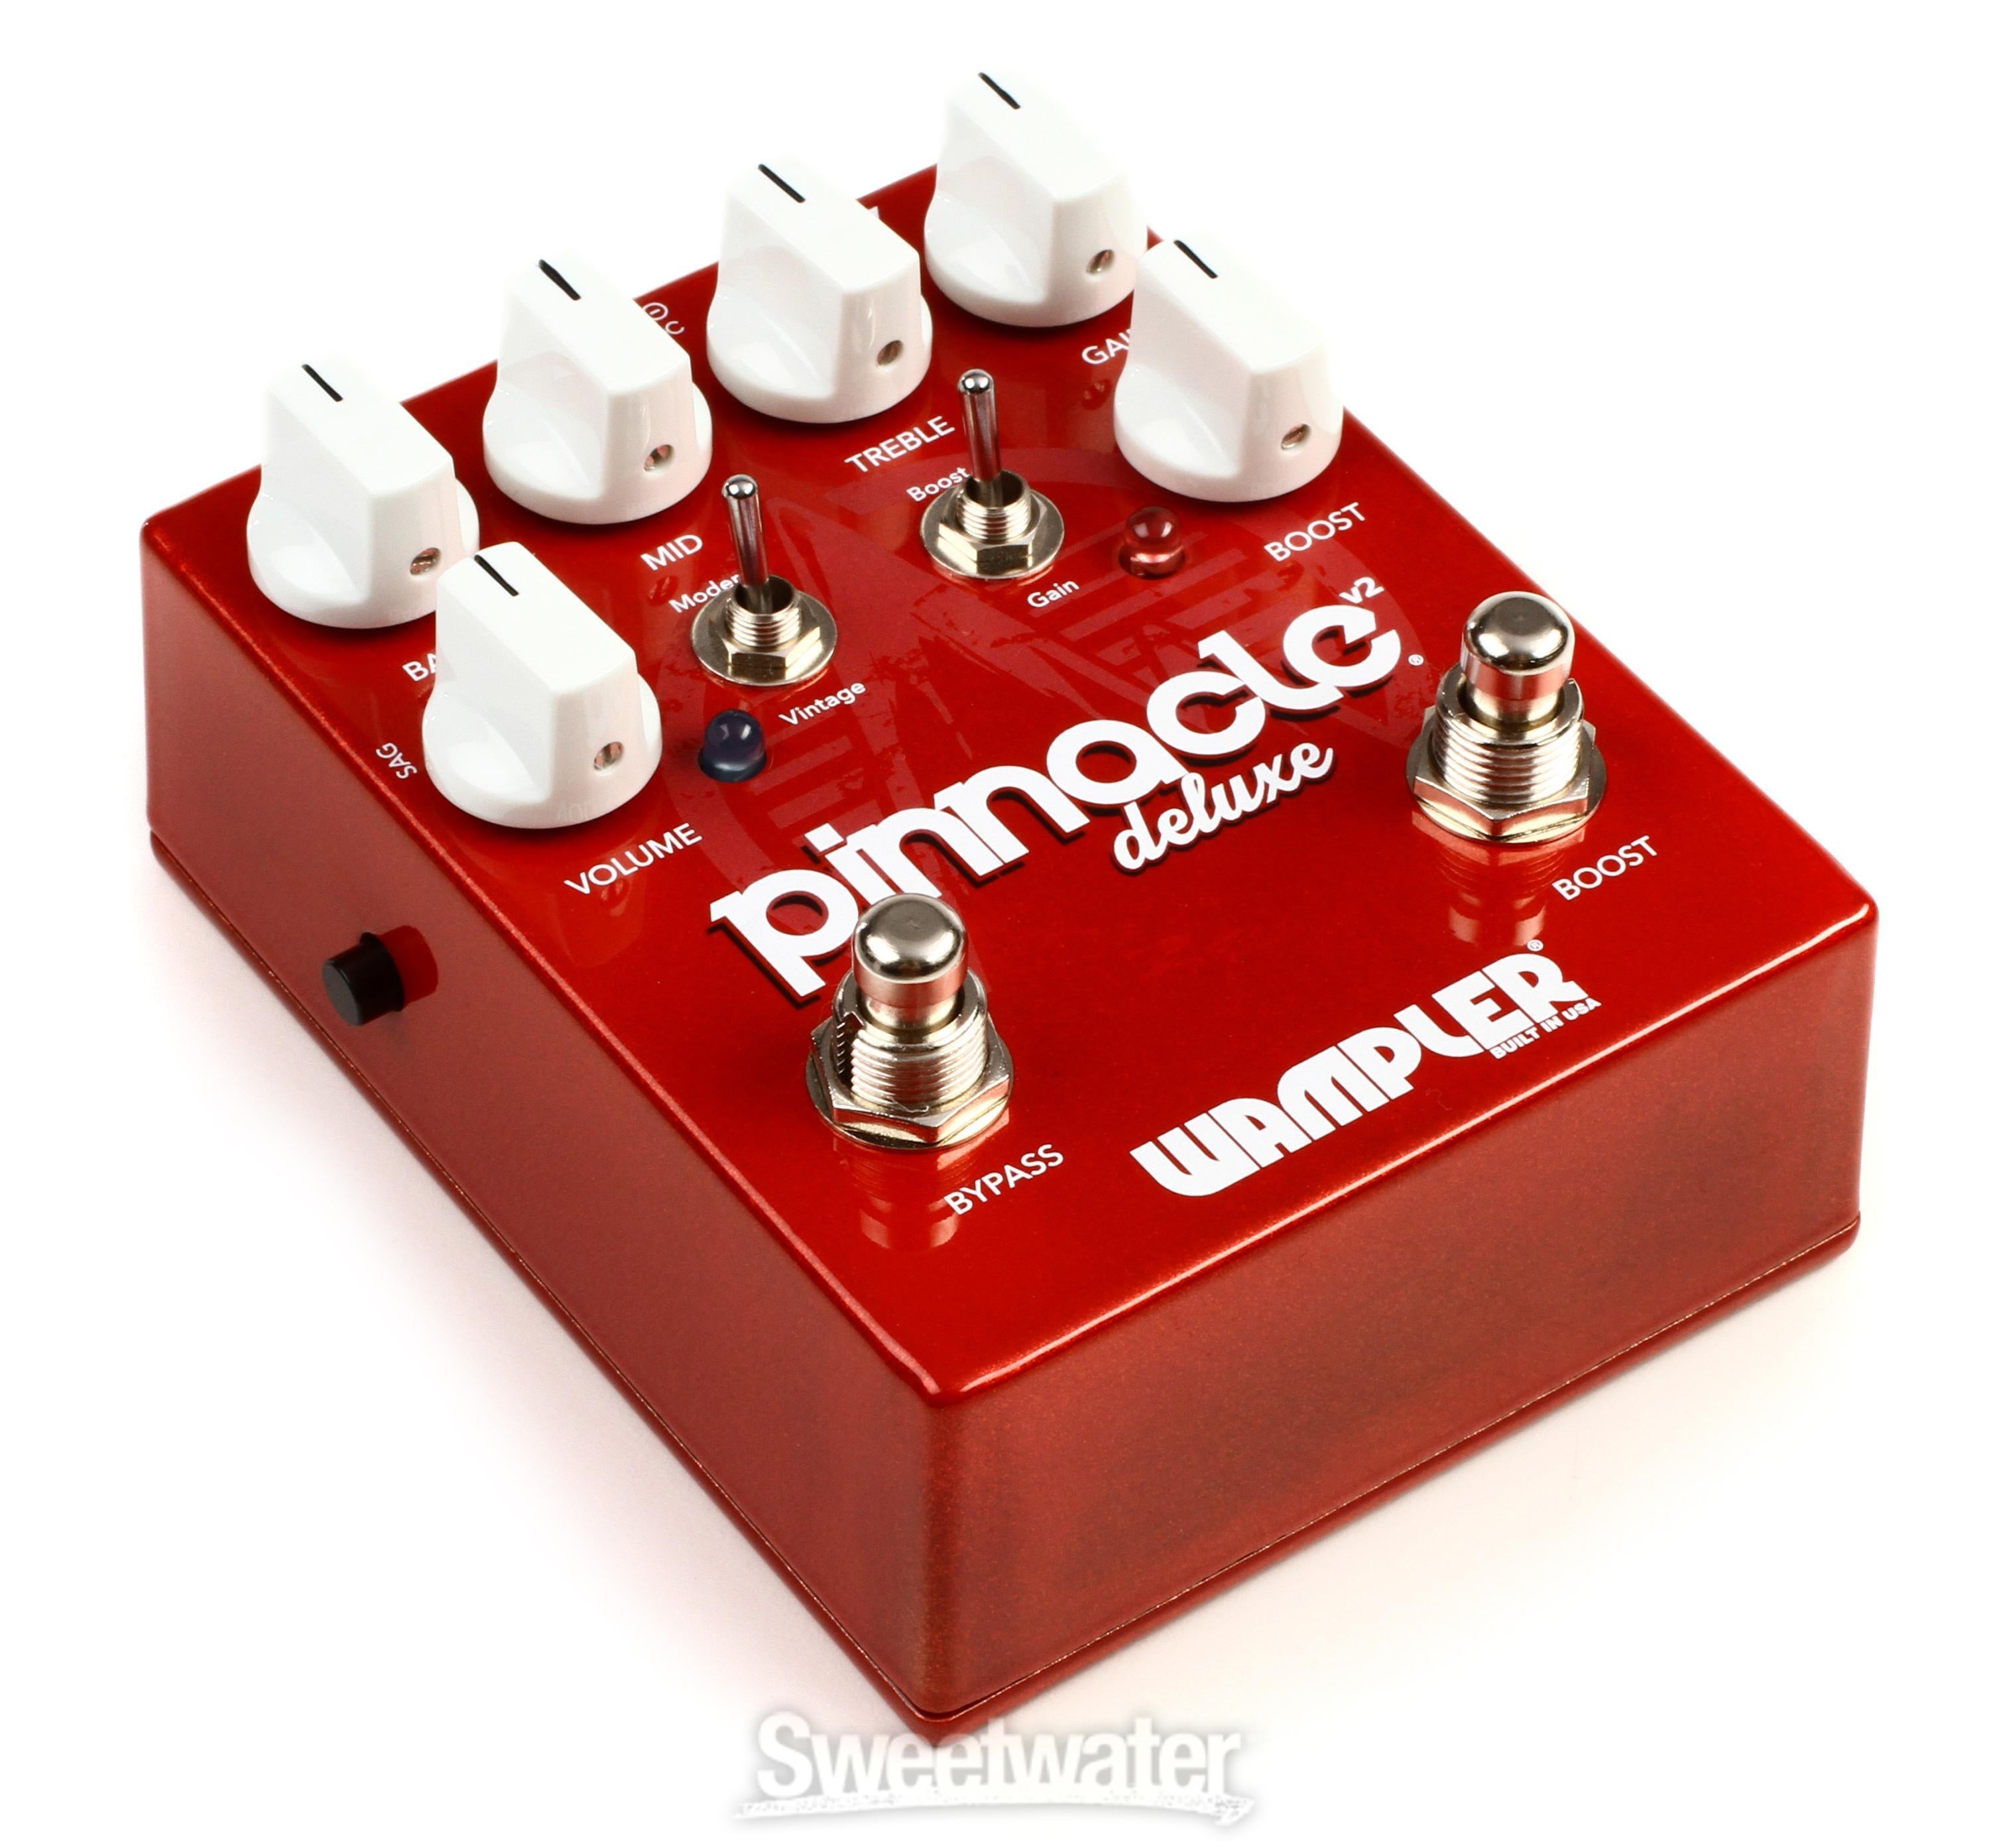 Wampler Pinnacle Deluxe V2 Overdrive Pedal | Sweetwater